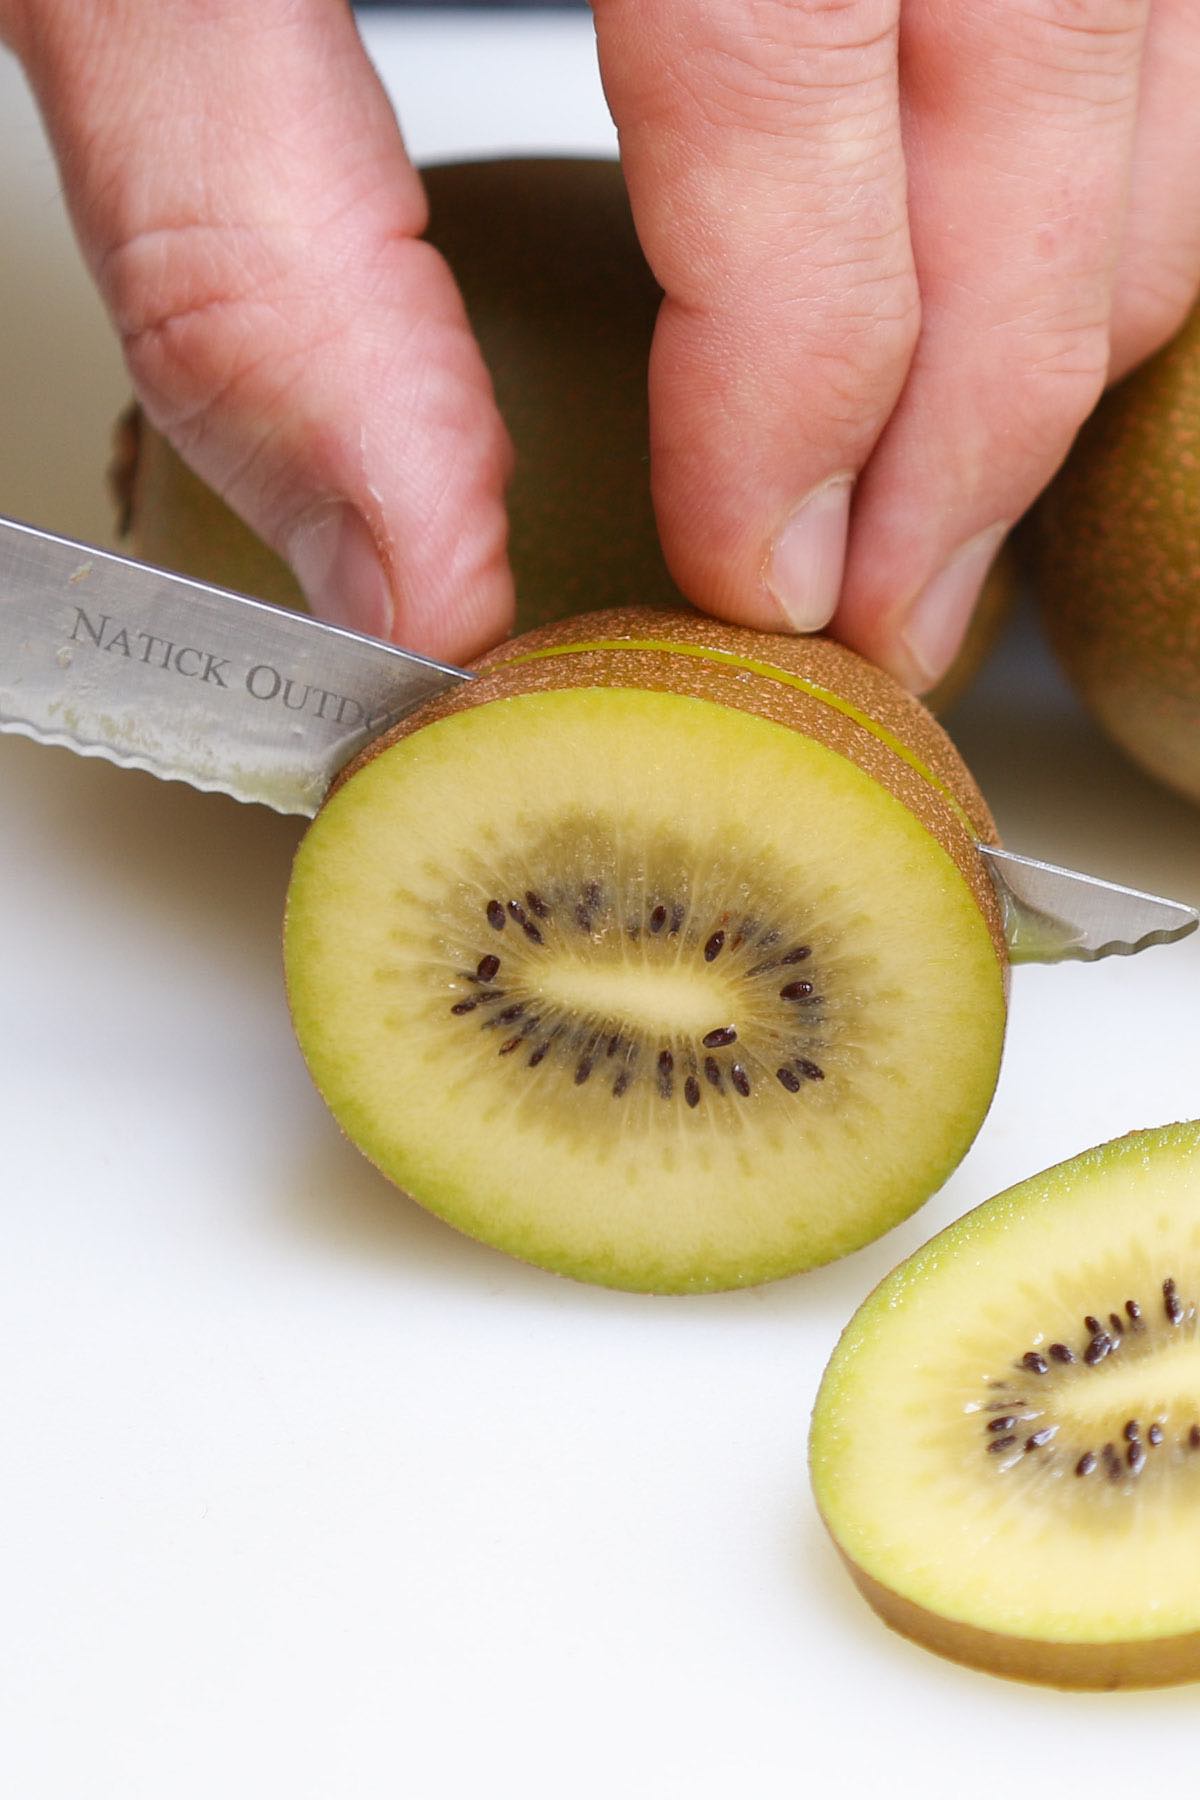 Slicing a kiwi widthwise with a paring knife while leaving the skin on